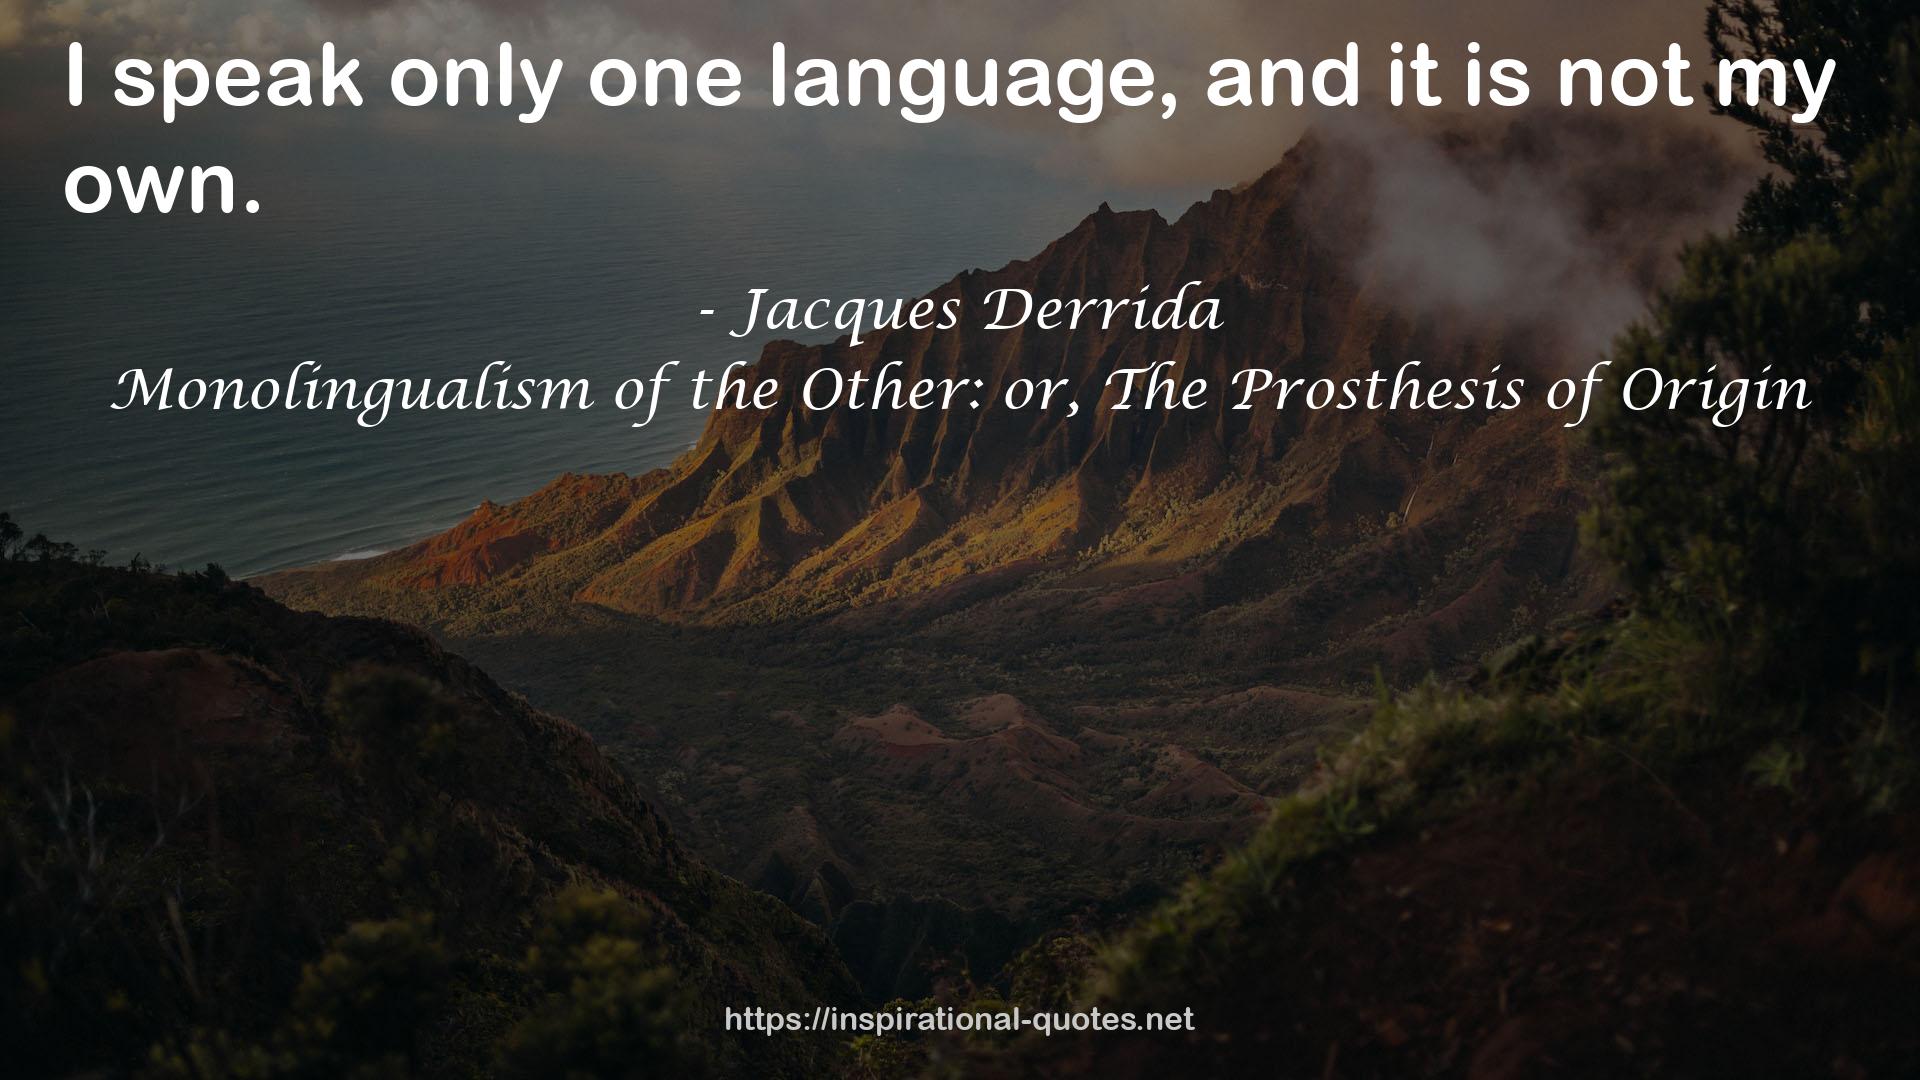 Monolingualism of the Other: or, The Prosthesis of Origin QUOTES